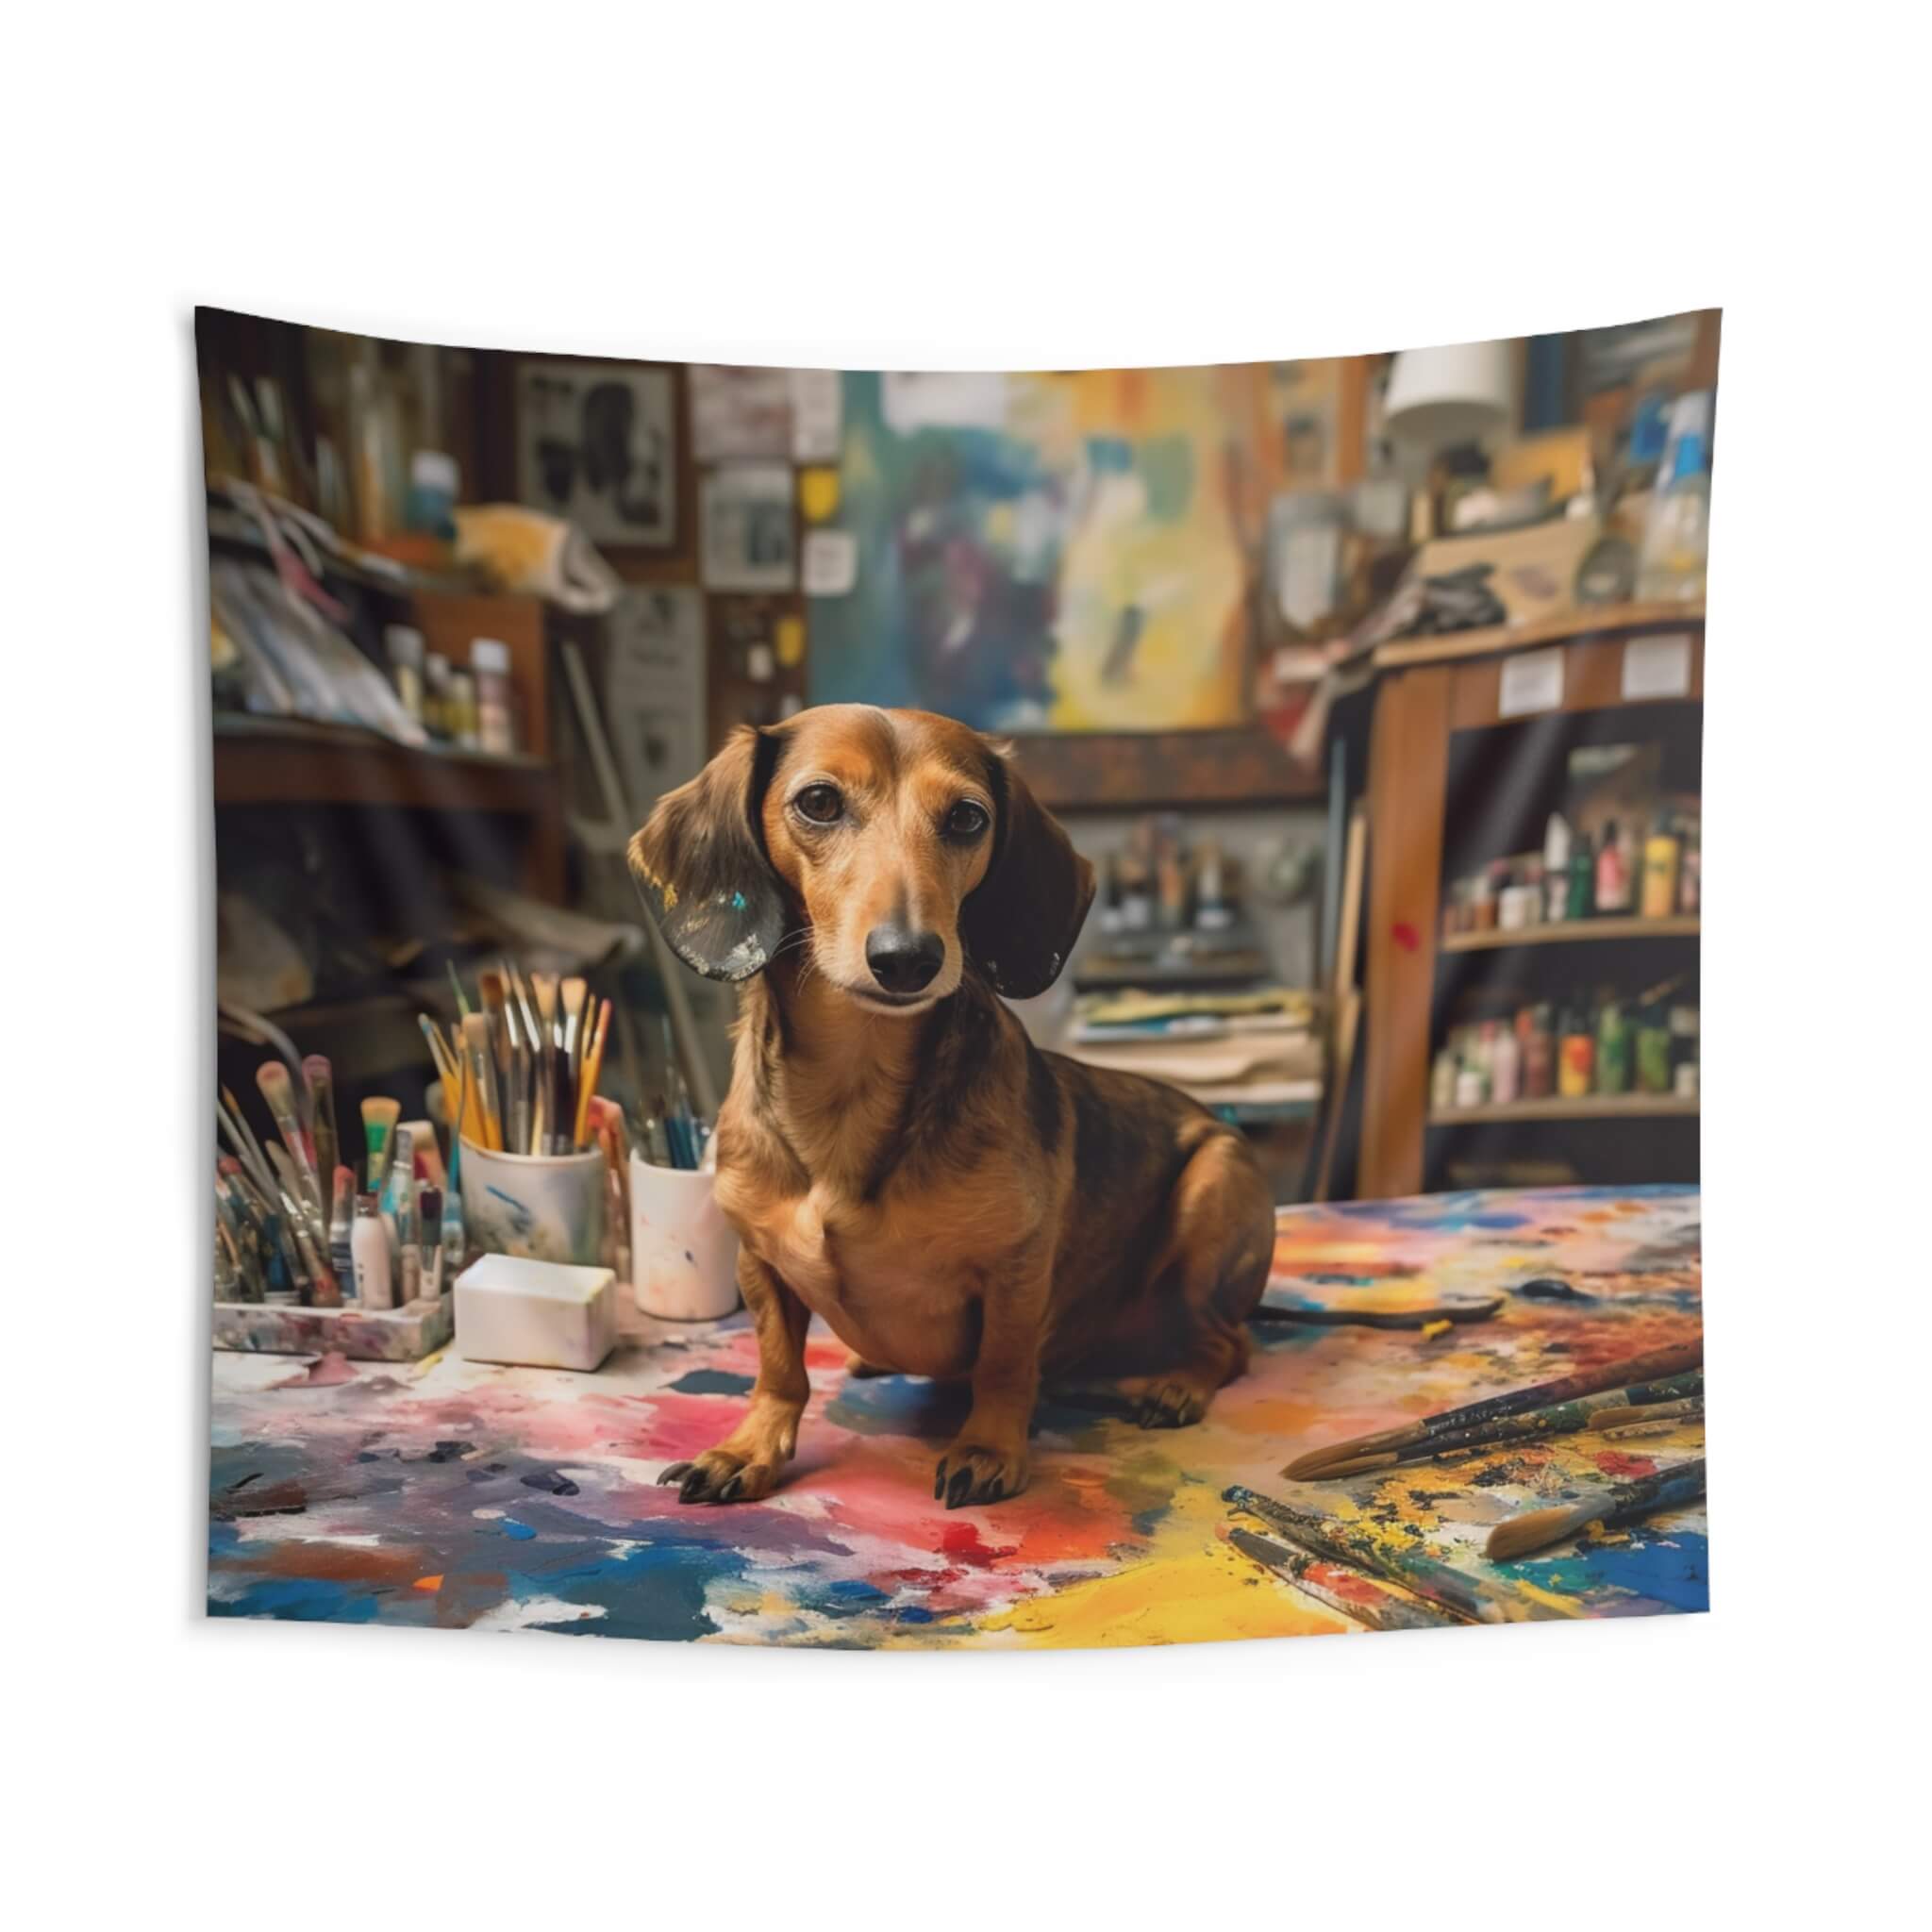 Dachshund Wall Art: Celebrating Our Adorable Wiener Dogs in Style!